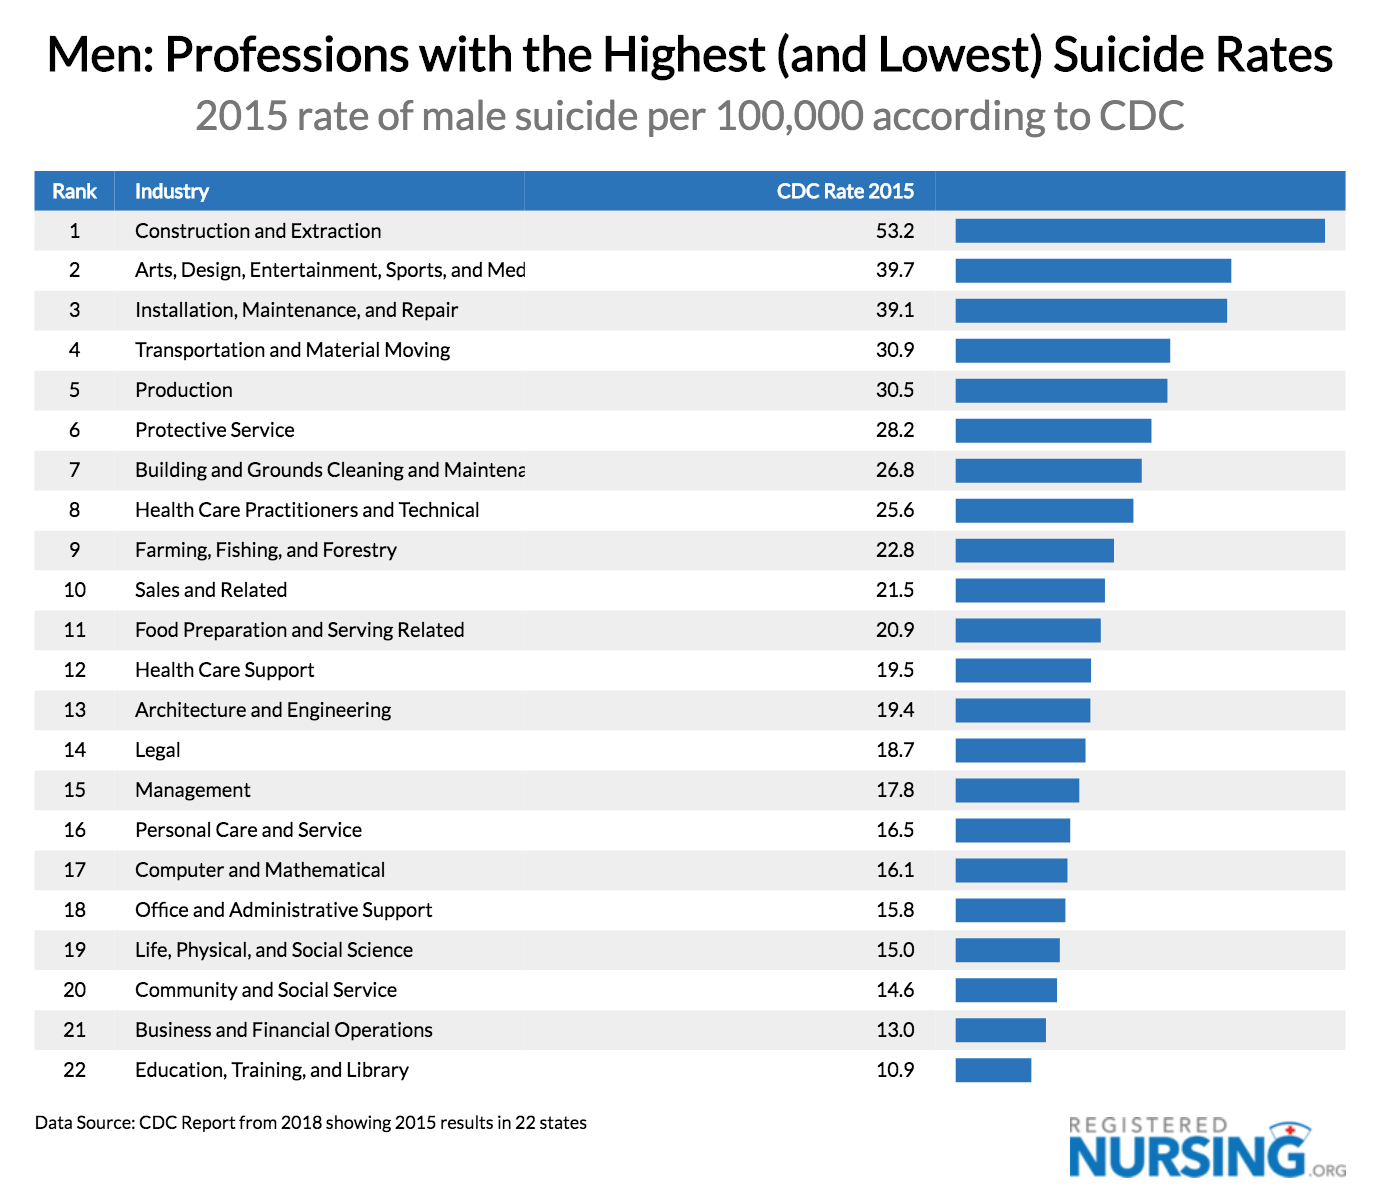 Highest & Lowest Suicide Rates for Men by Profession